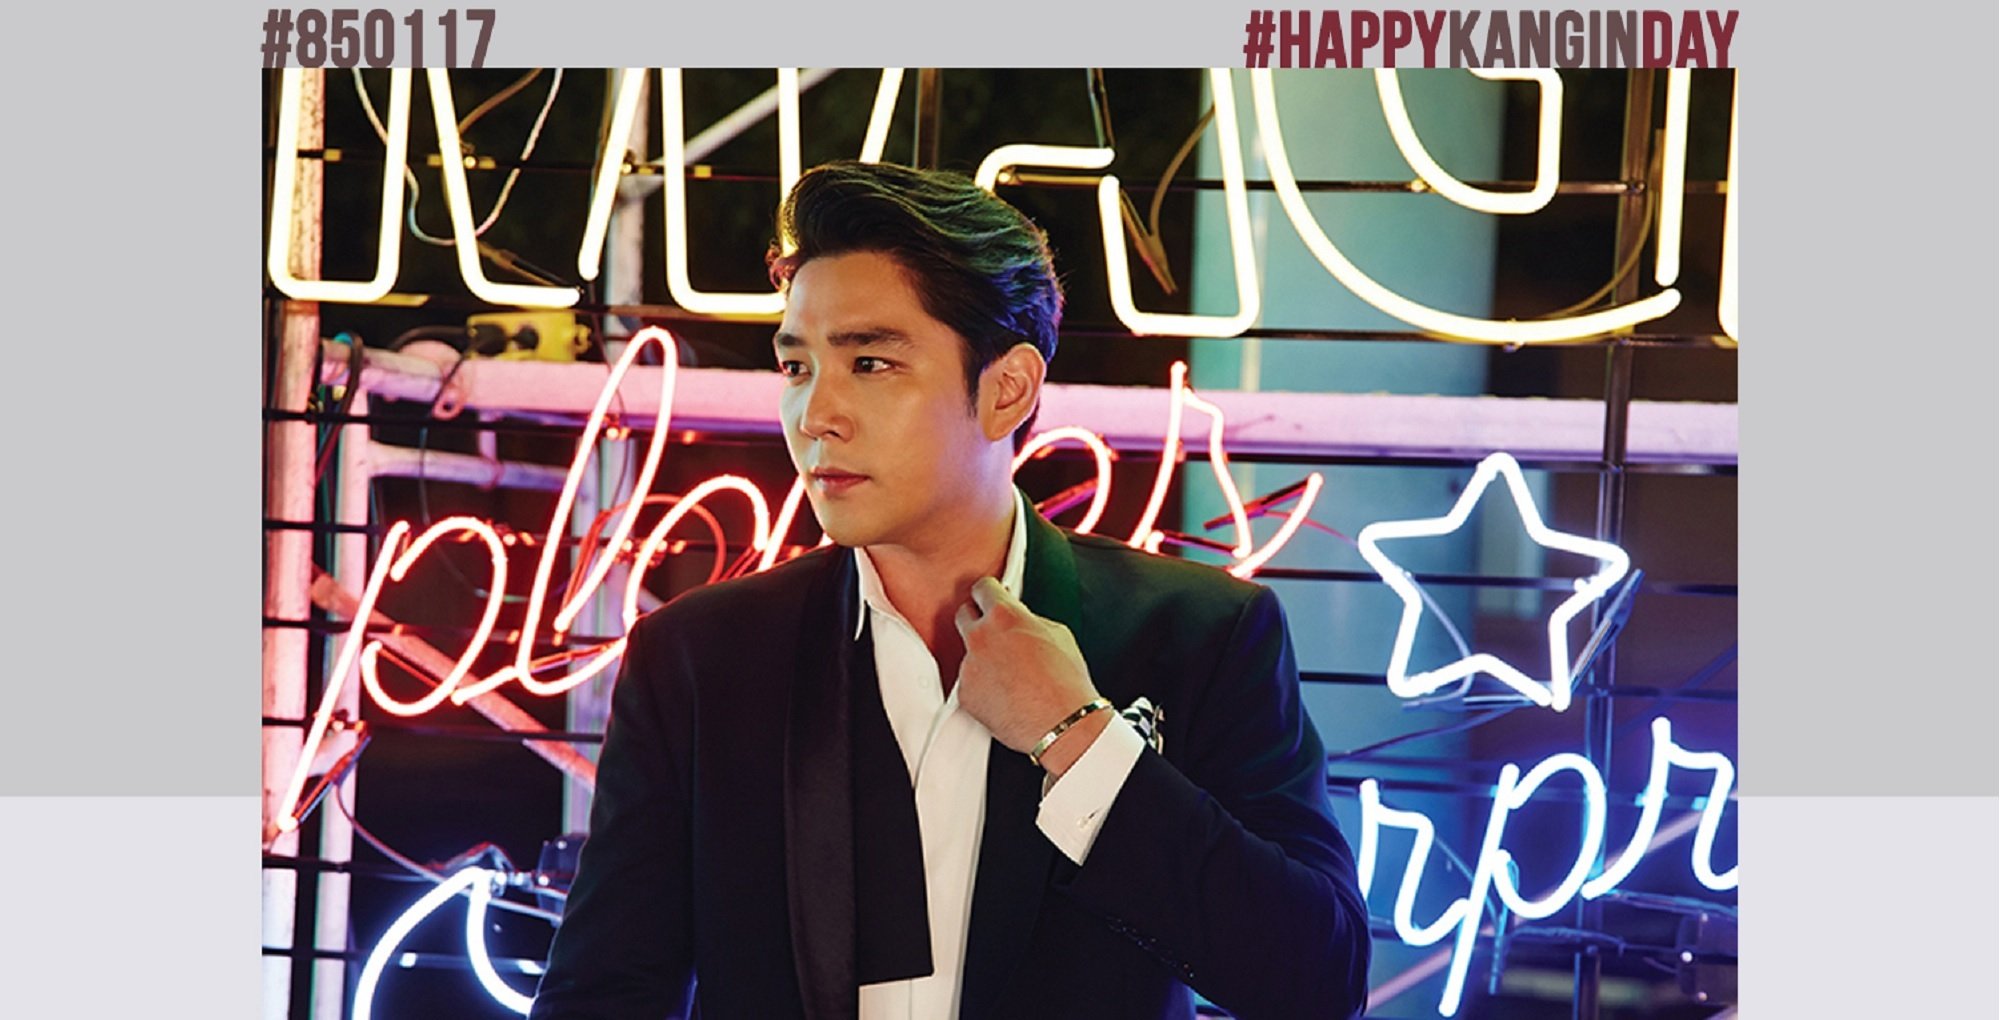 Netizens are shocked to see SM Entertainment posting a celebratory message for Kangin's birthday